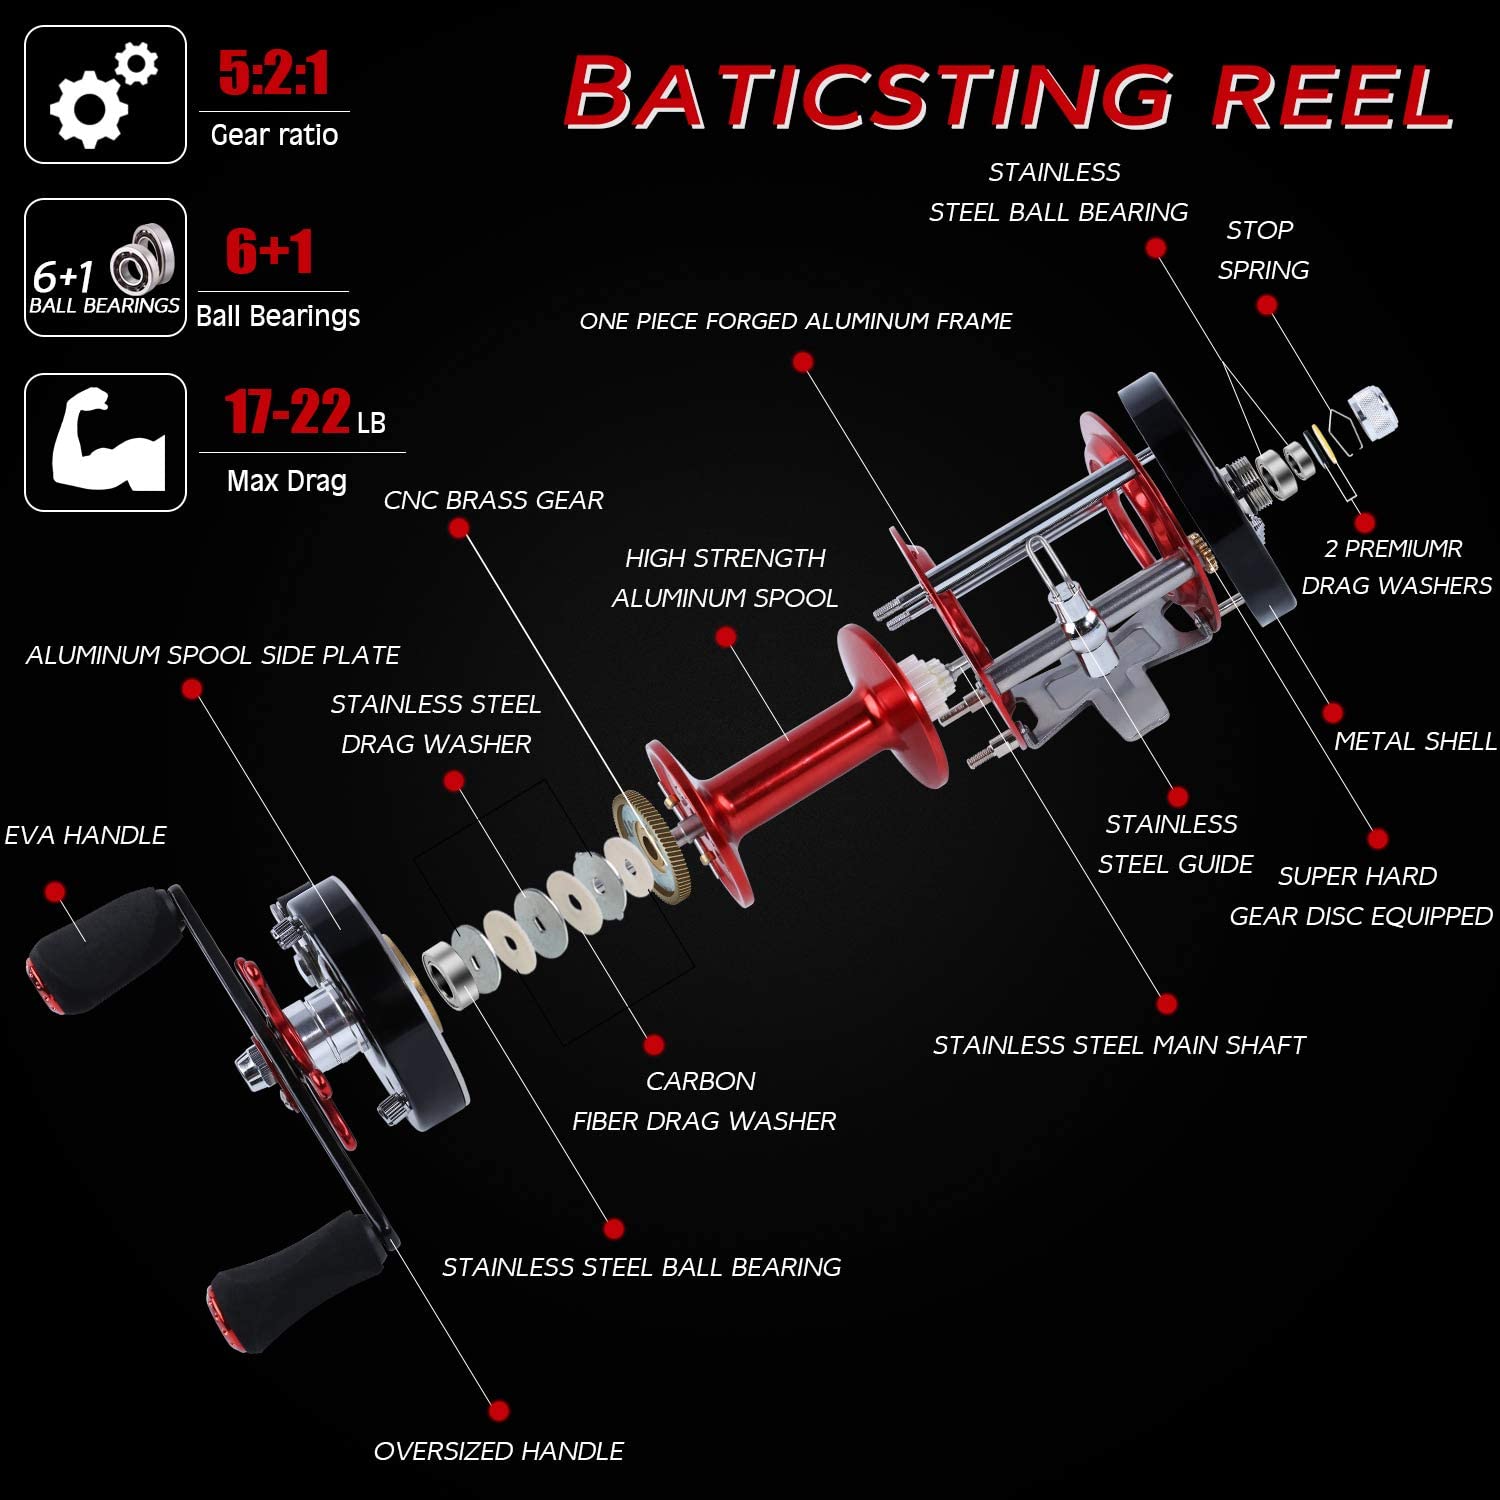 Sougayilang Round Baitcasting Reel Reinforced Metal Body EVA Left/Right Handle Conventional Fishing Reel - image 3 of 7